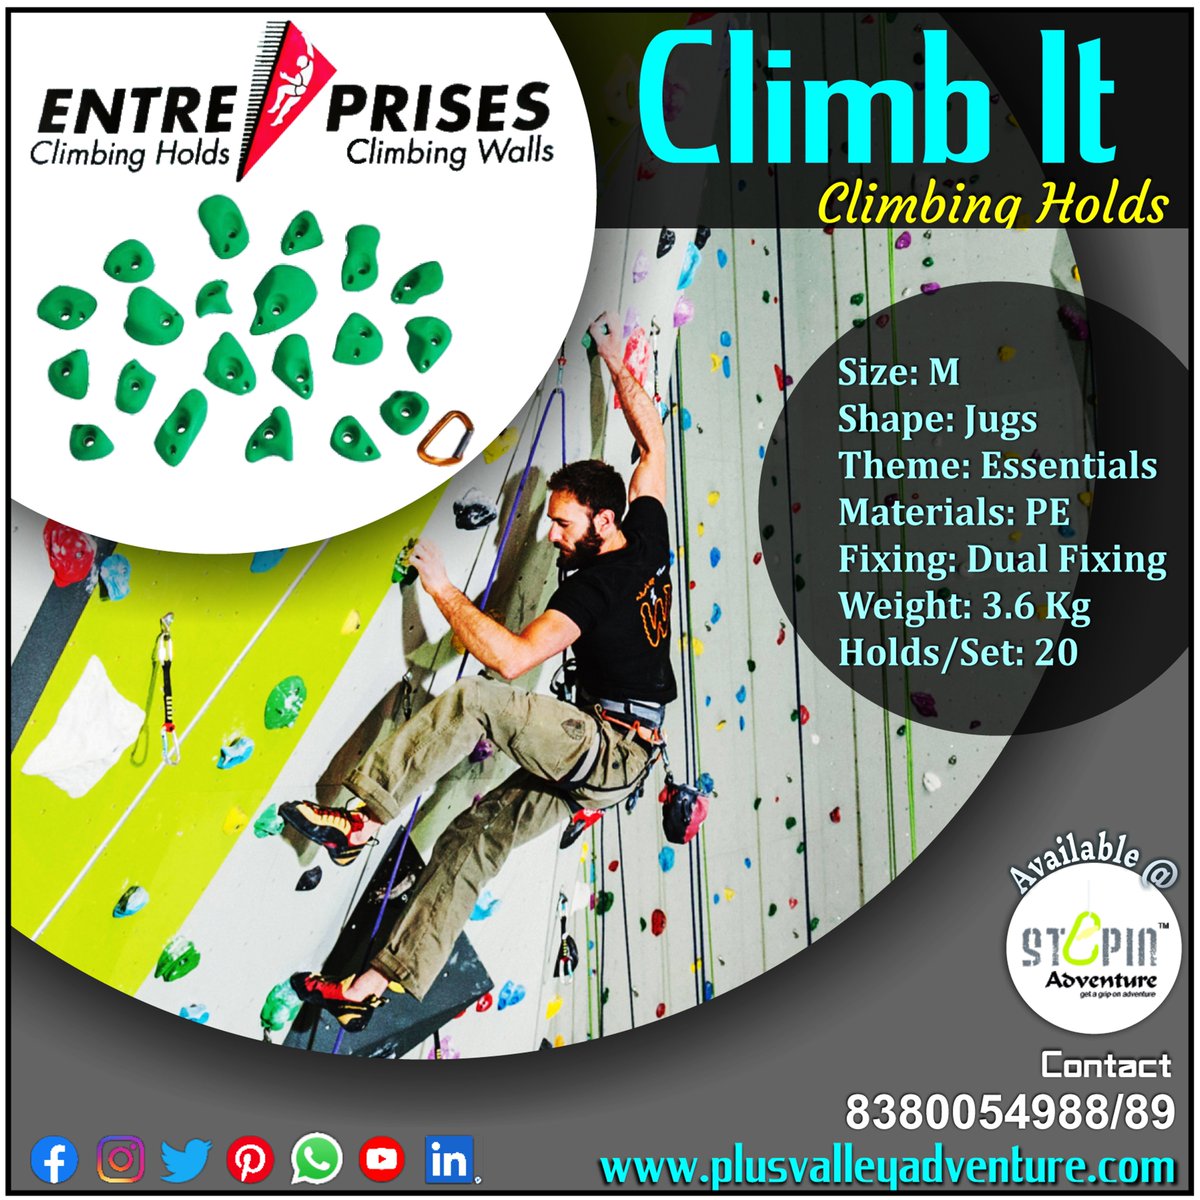 #Climbing #Holds #Installation and #services in #Pune
bit.ly/31EqtIZ
 #classics #holdssale #fillerup #pusherclimbing #escape #routesetters #homewall  #boulder #stokedclimbing #climbingvolumes #climbinggym #climbingtraining
#climblife  #rockover #climbingnation